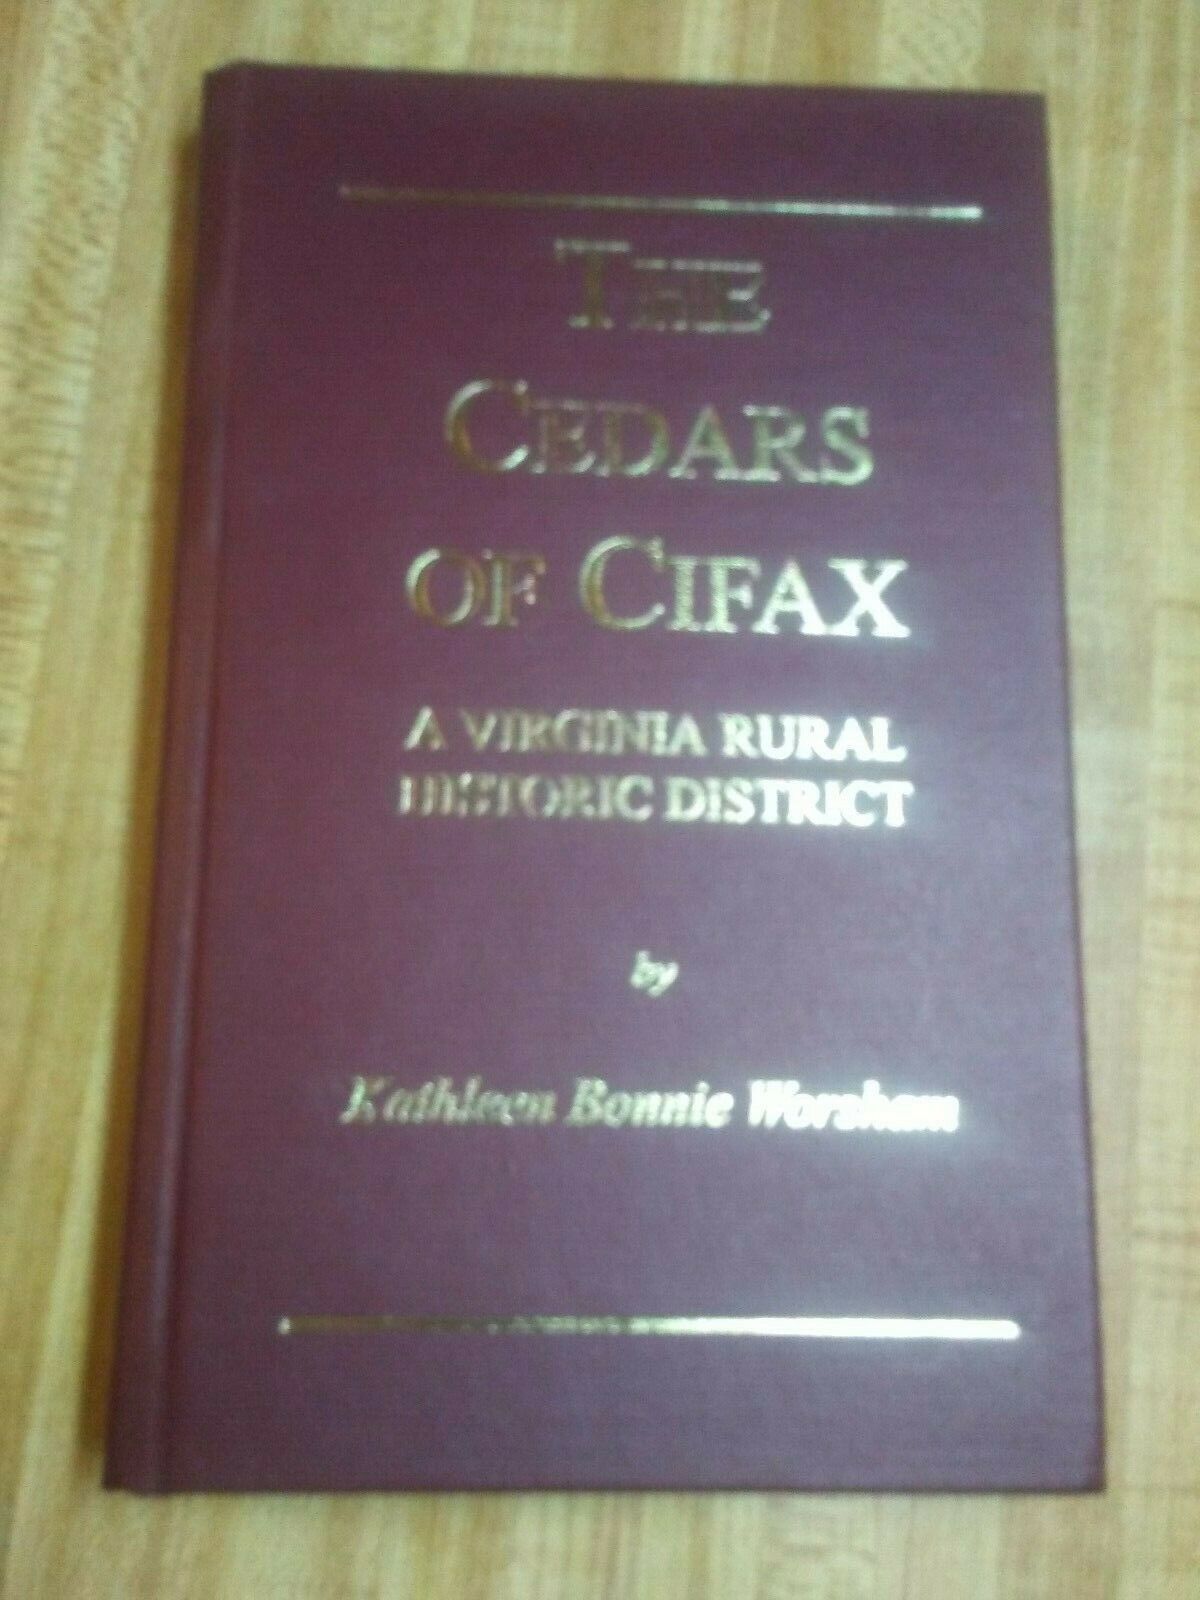 Primary image for The Cedars of Cifax by Kathleen Bonnie Worsham